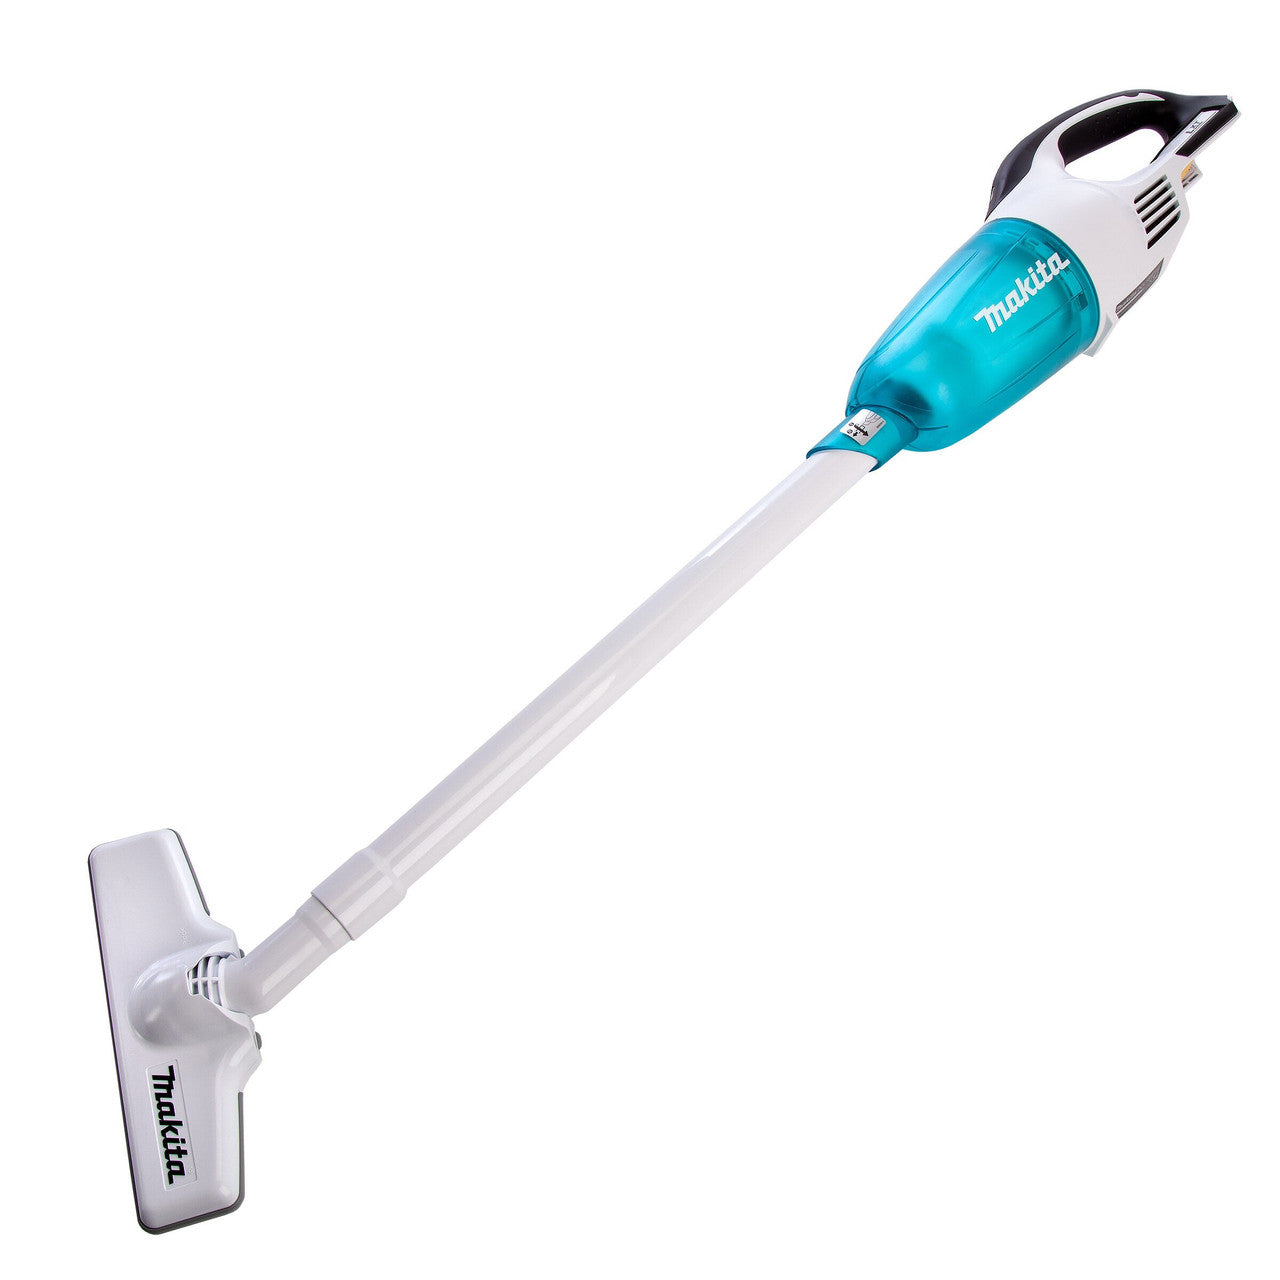 Makita DCL181F 18V LXT Cordless Vacuum Cleaner (Body Only)